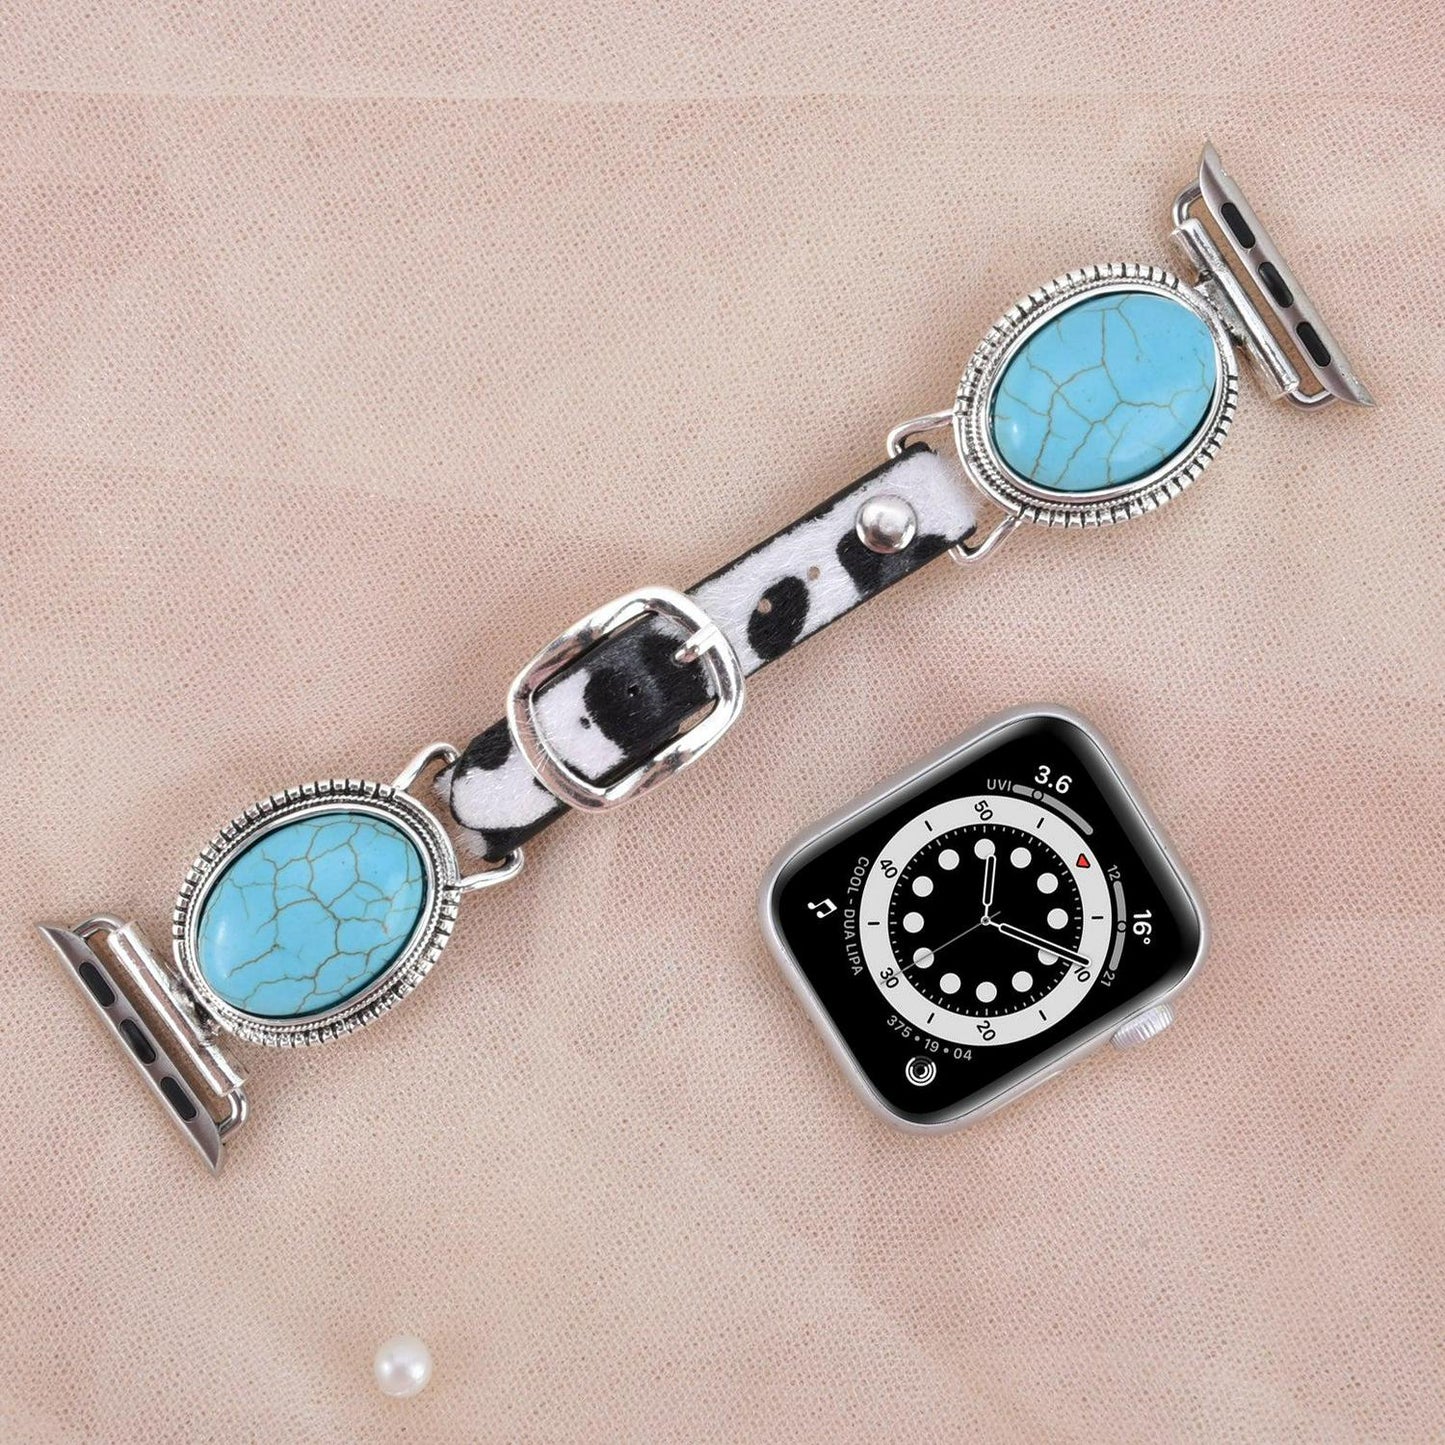 Apple Watch Bands For Women Black/White Genuine Leather Blue Stone Band